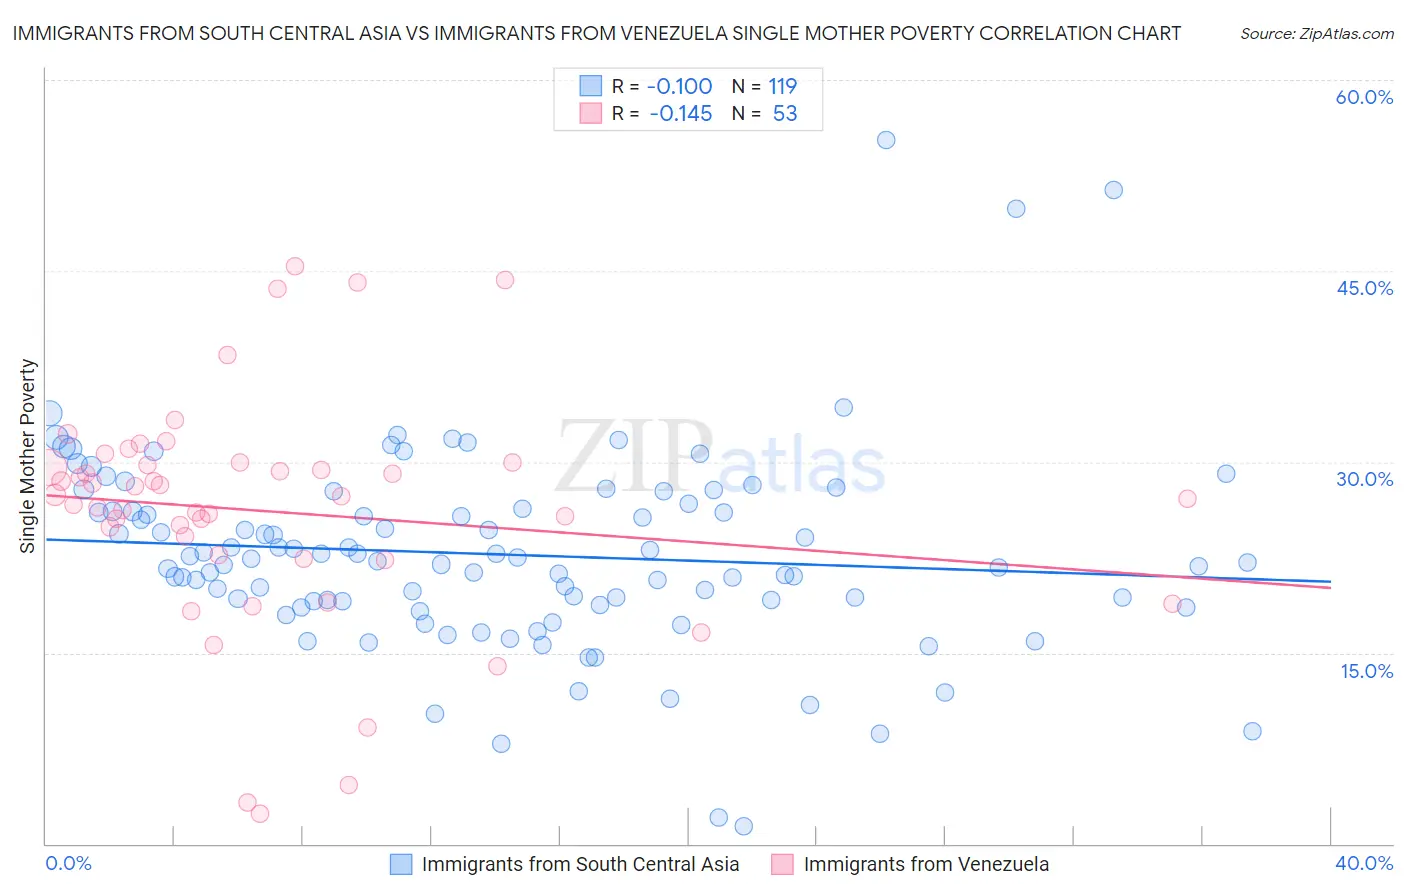 Immigrants from South Central Asia vs Immigrants from Venezuela Single Mother Poverty